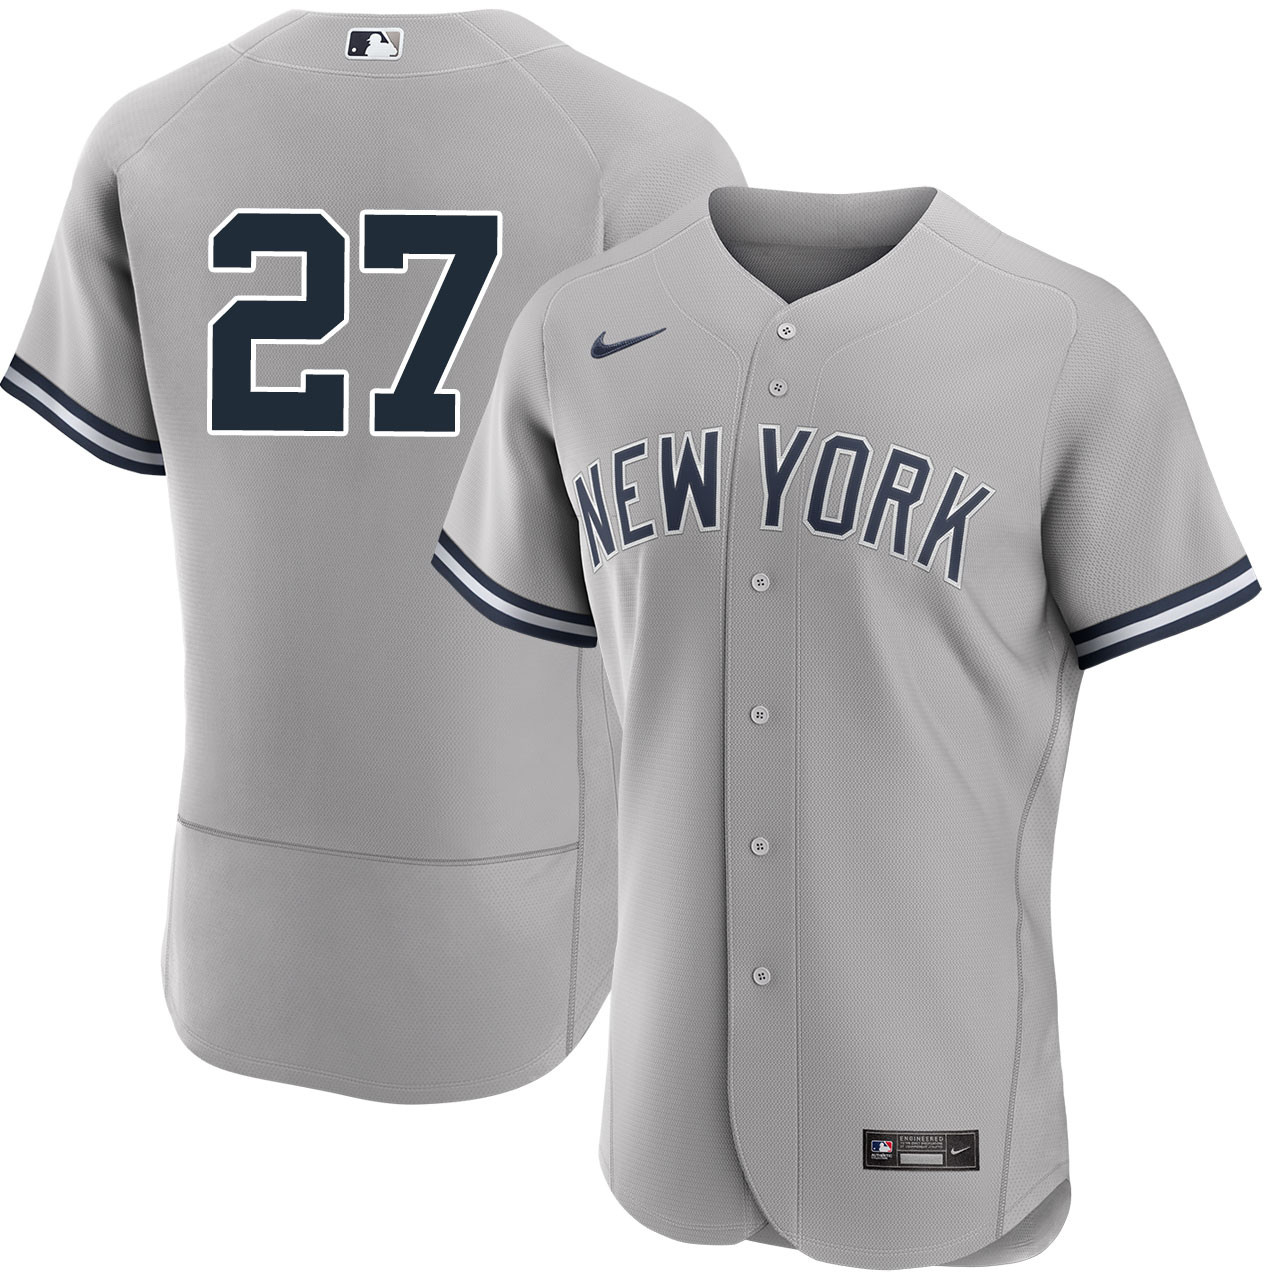 Men's New York Yankees Nike Babe Ruth Road Jersey, 48% OFF